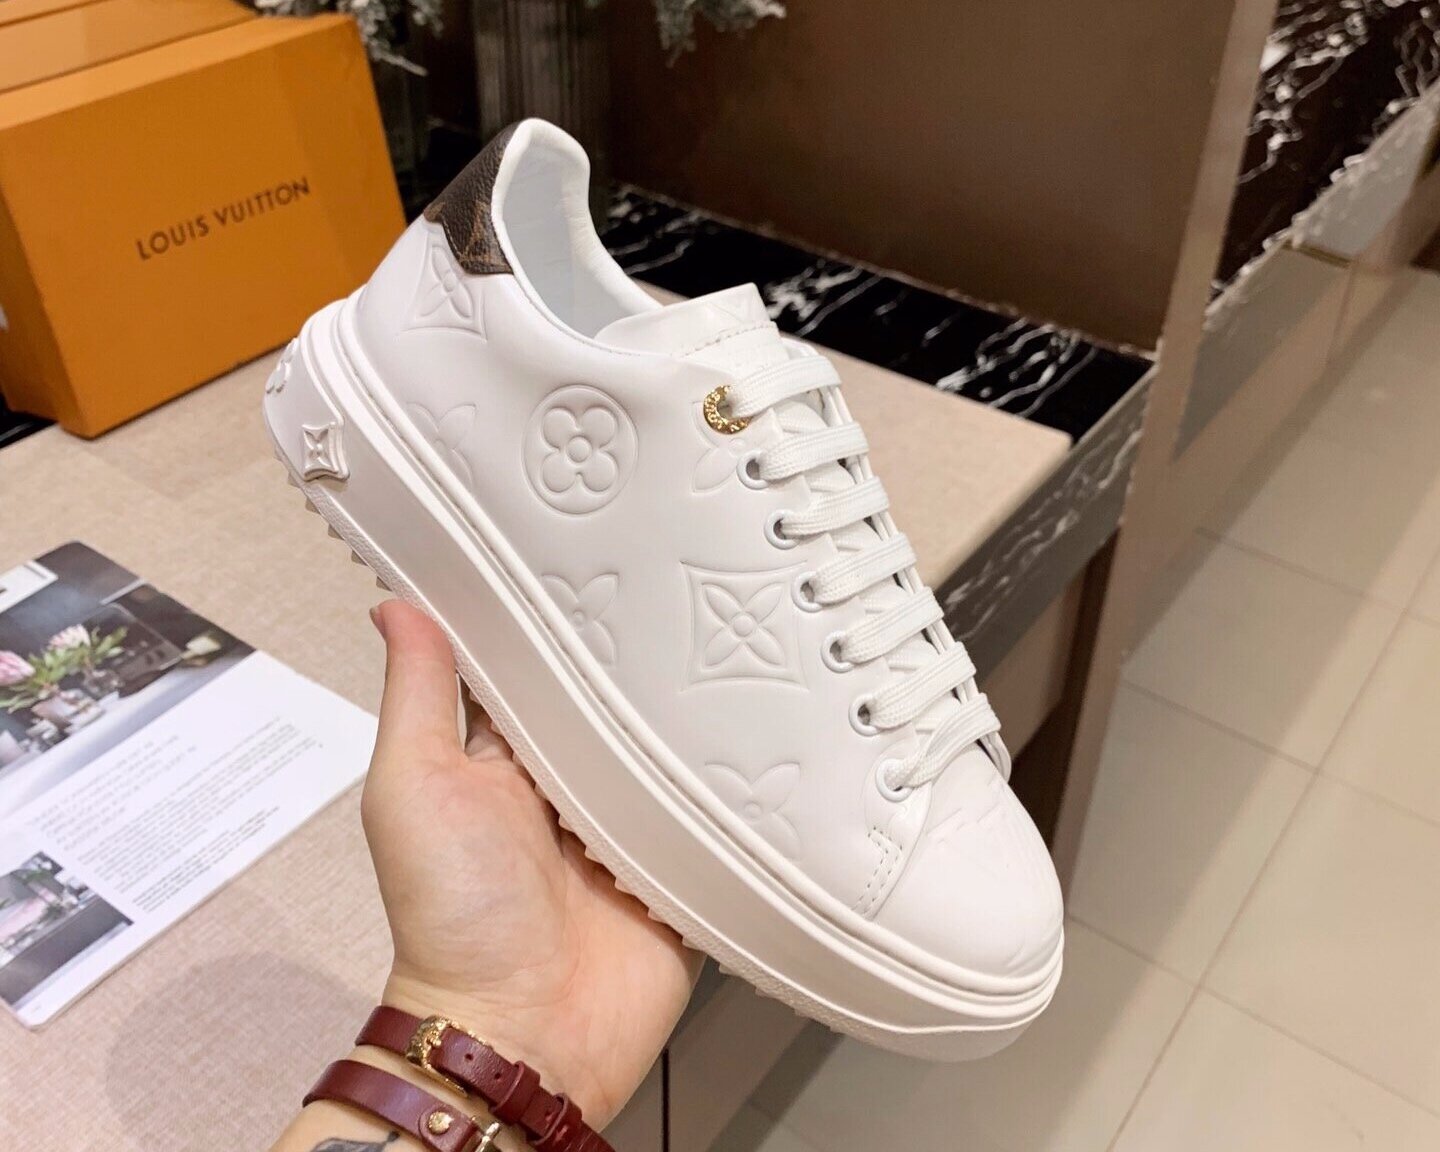 5kempirefashionstore - Louis Vuitton sneakers Available in size 40-45  35,000 Payment on delivery Fullboxpacking Nationwidelivery Delivery charges  apply DM or click link on bio Whatsap:08159792751 Quality Luxury  #hustlwersquare#vendorsfinder#gains